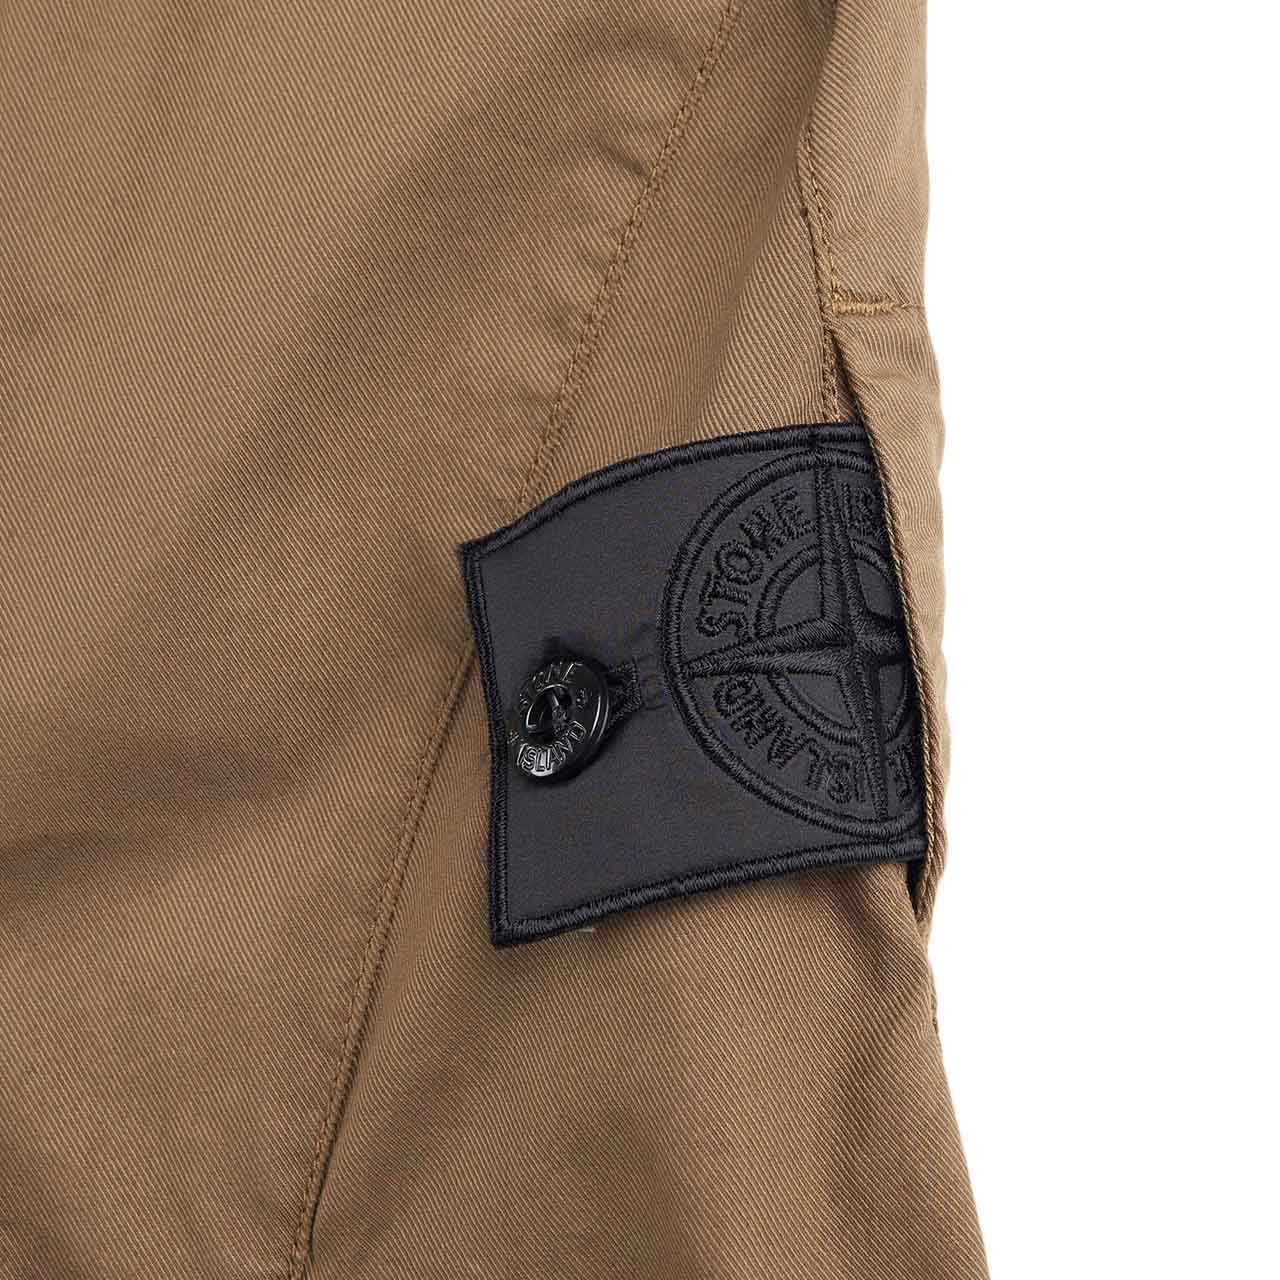 stone island shadow project cargo pant (brown)